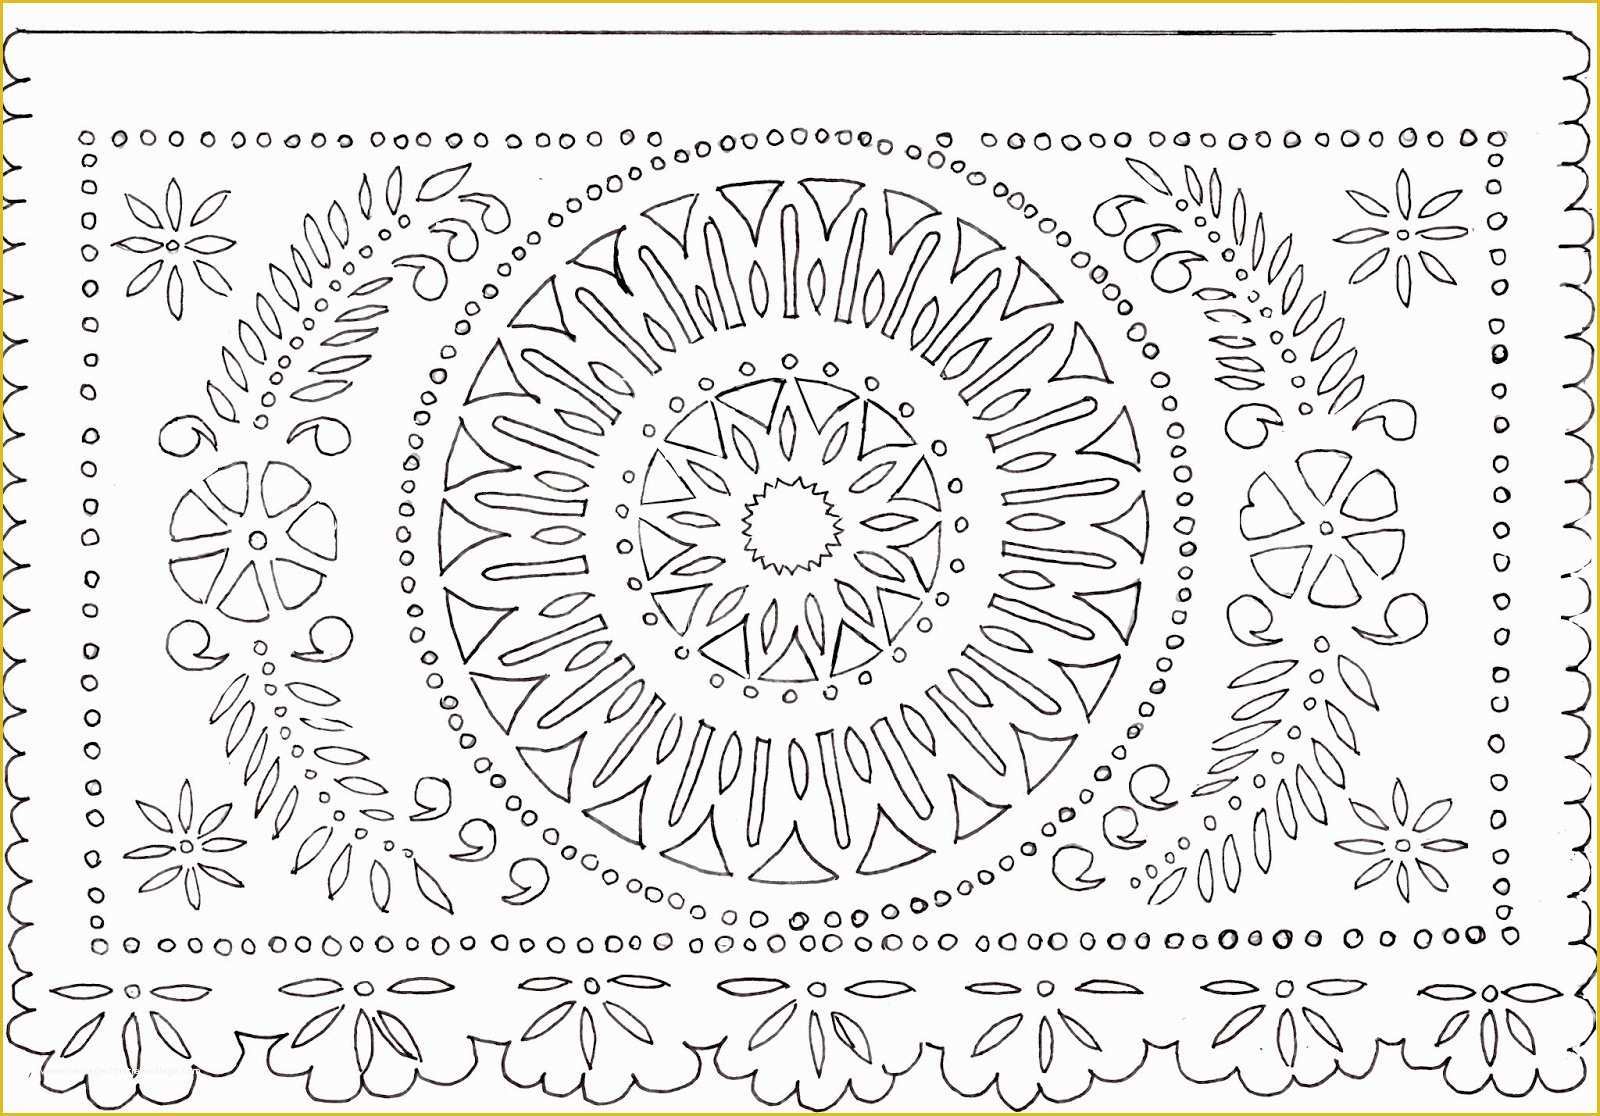 Free Printable Papel Picado Template Of Introducing New Worlds with A Shrug Make This Papel Picado